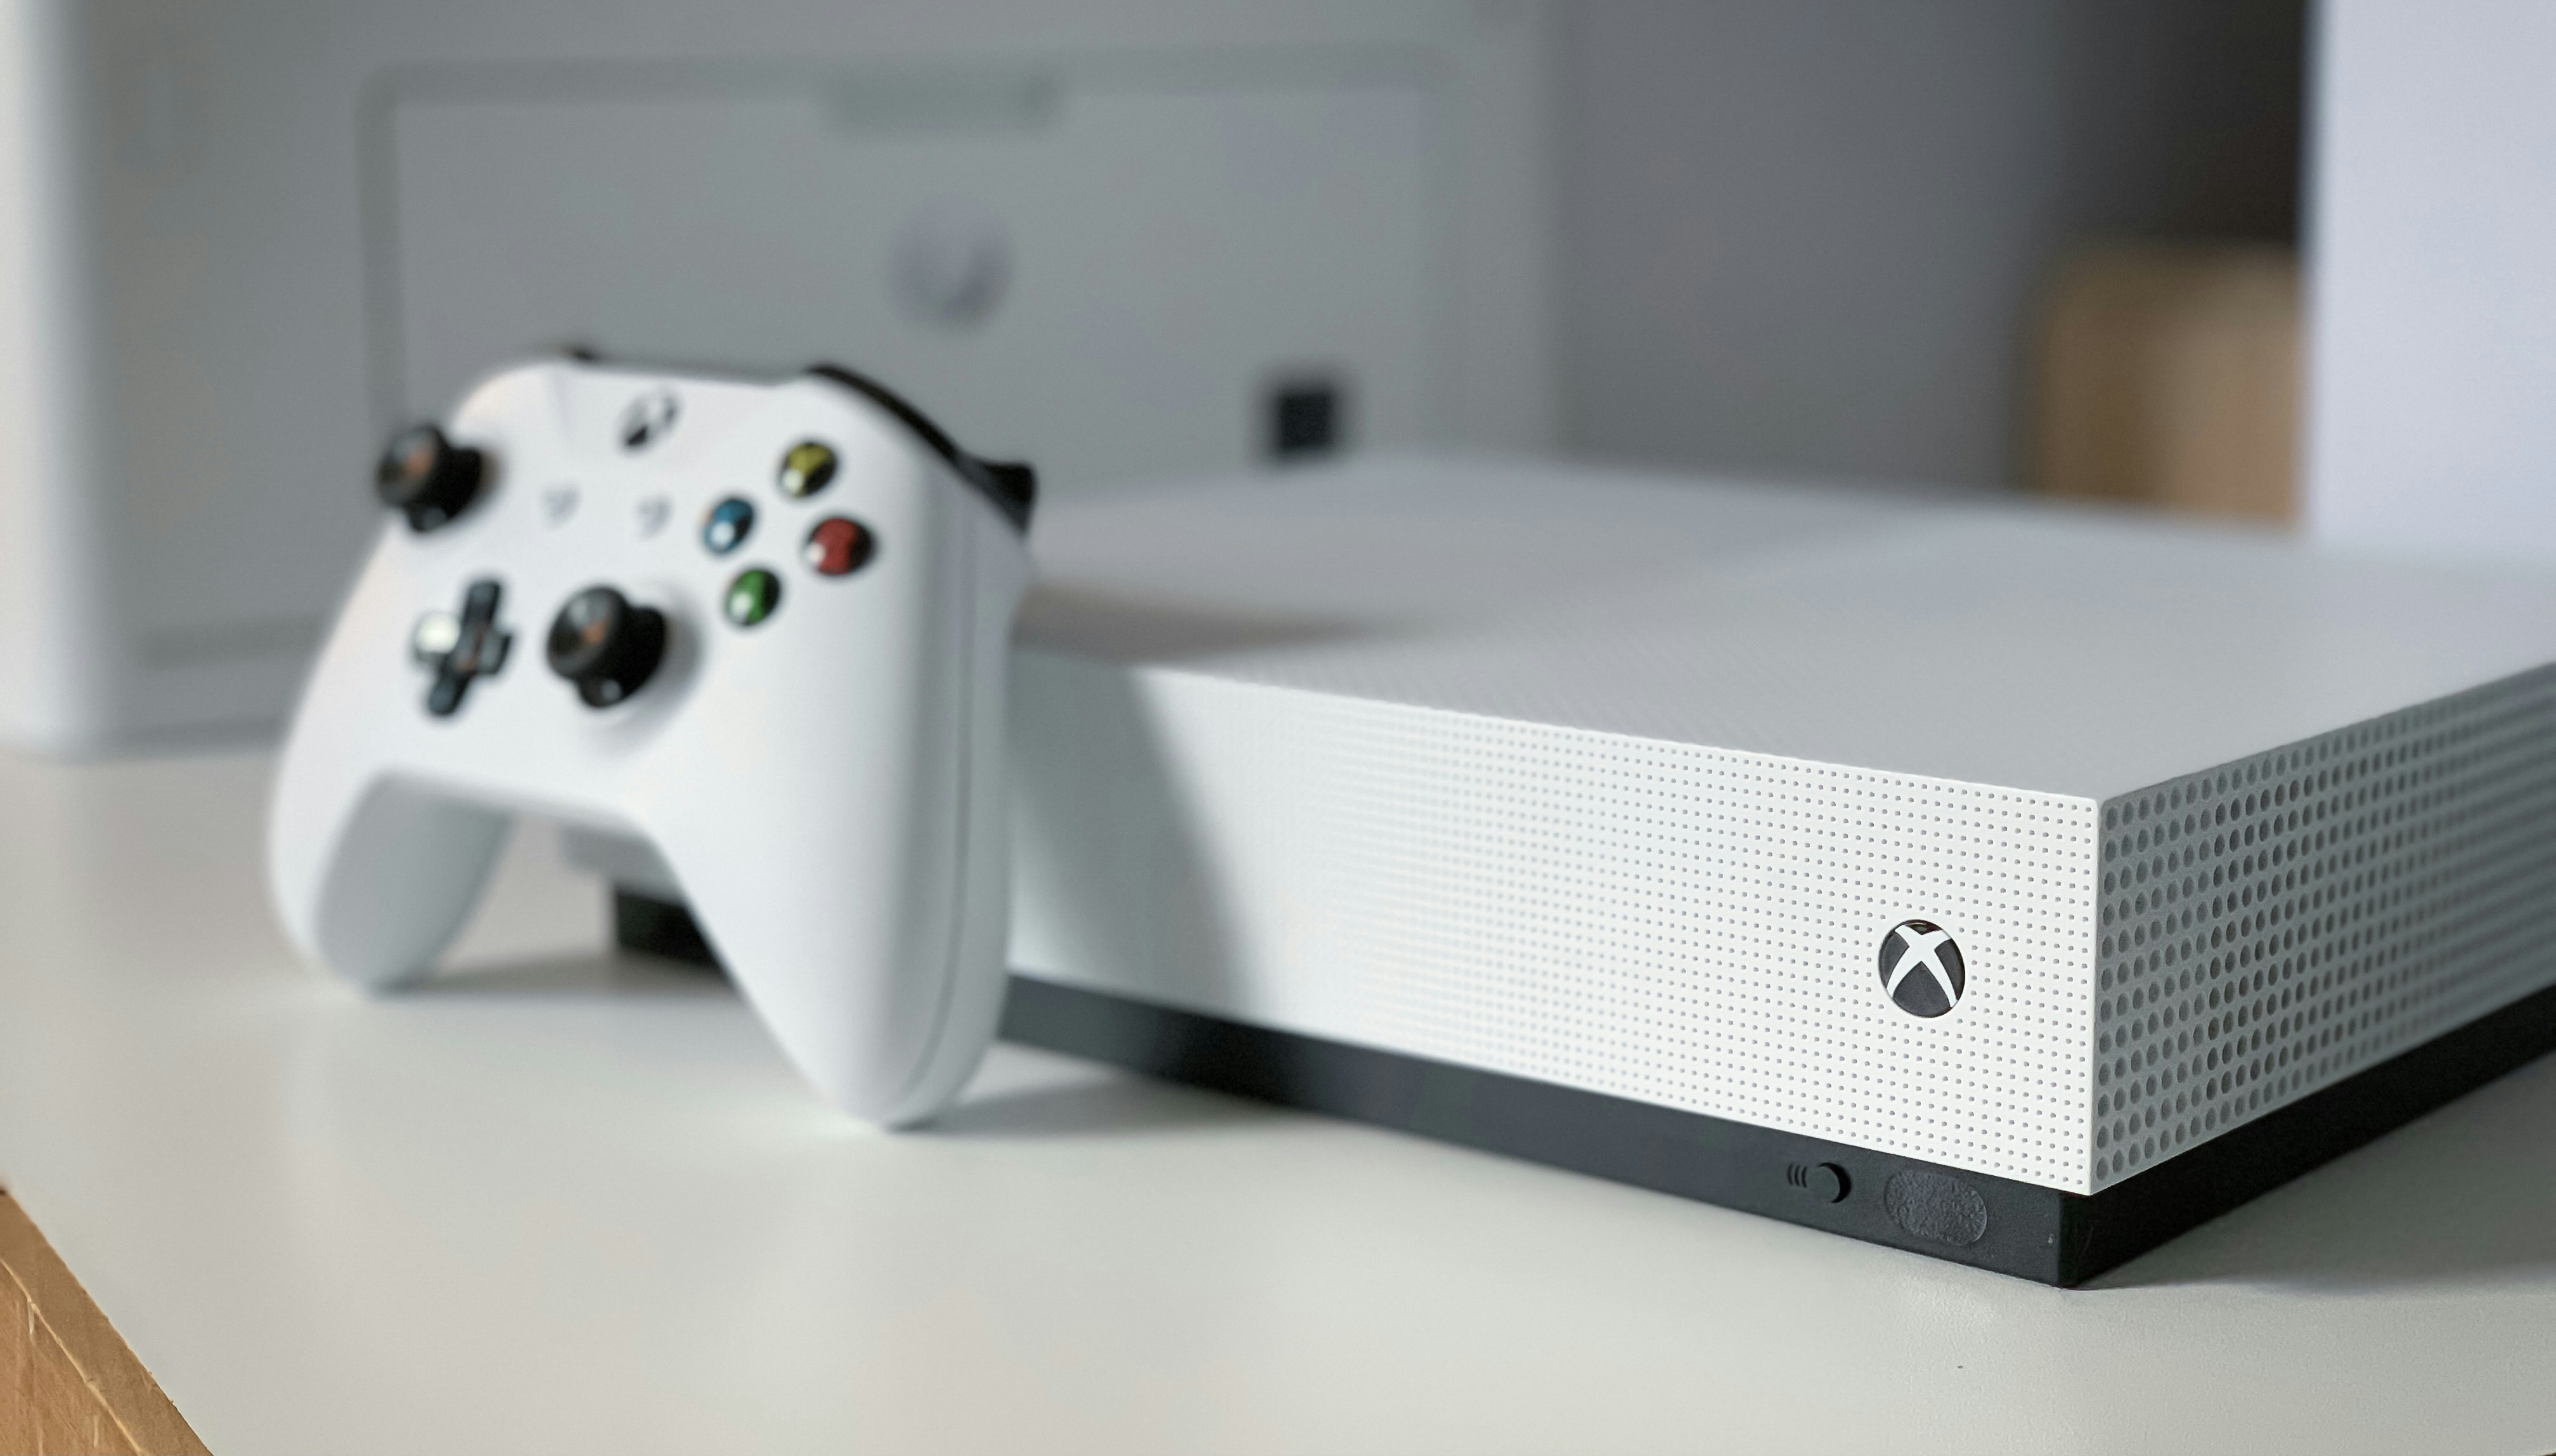 How To Fix Xbox One That Beeps But Doesn't Turn On? – Automate Your Life